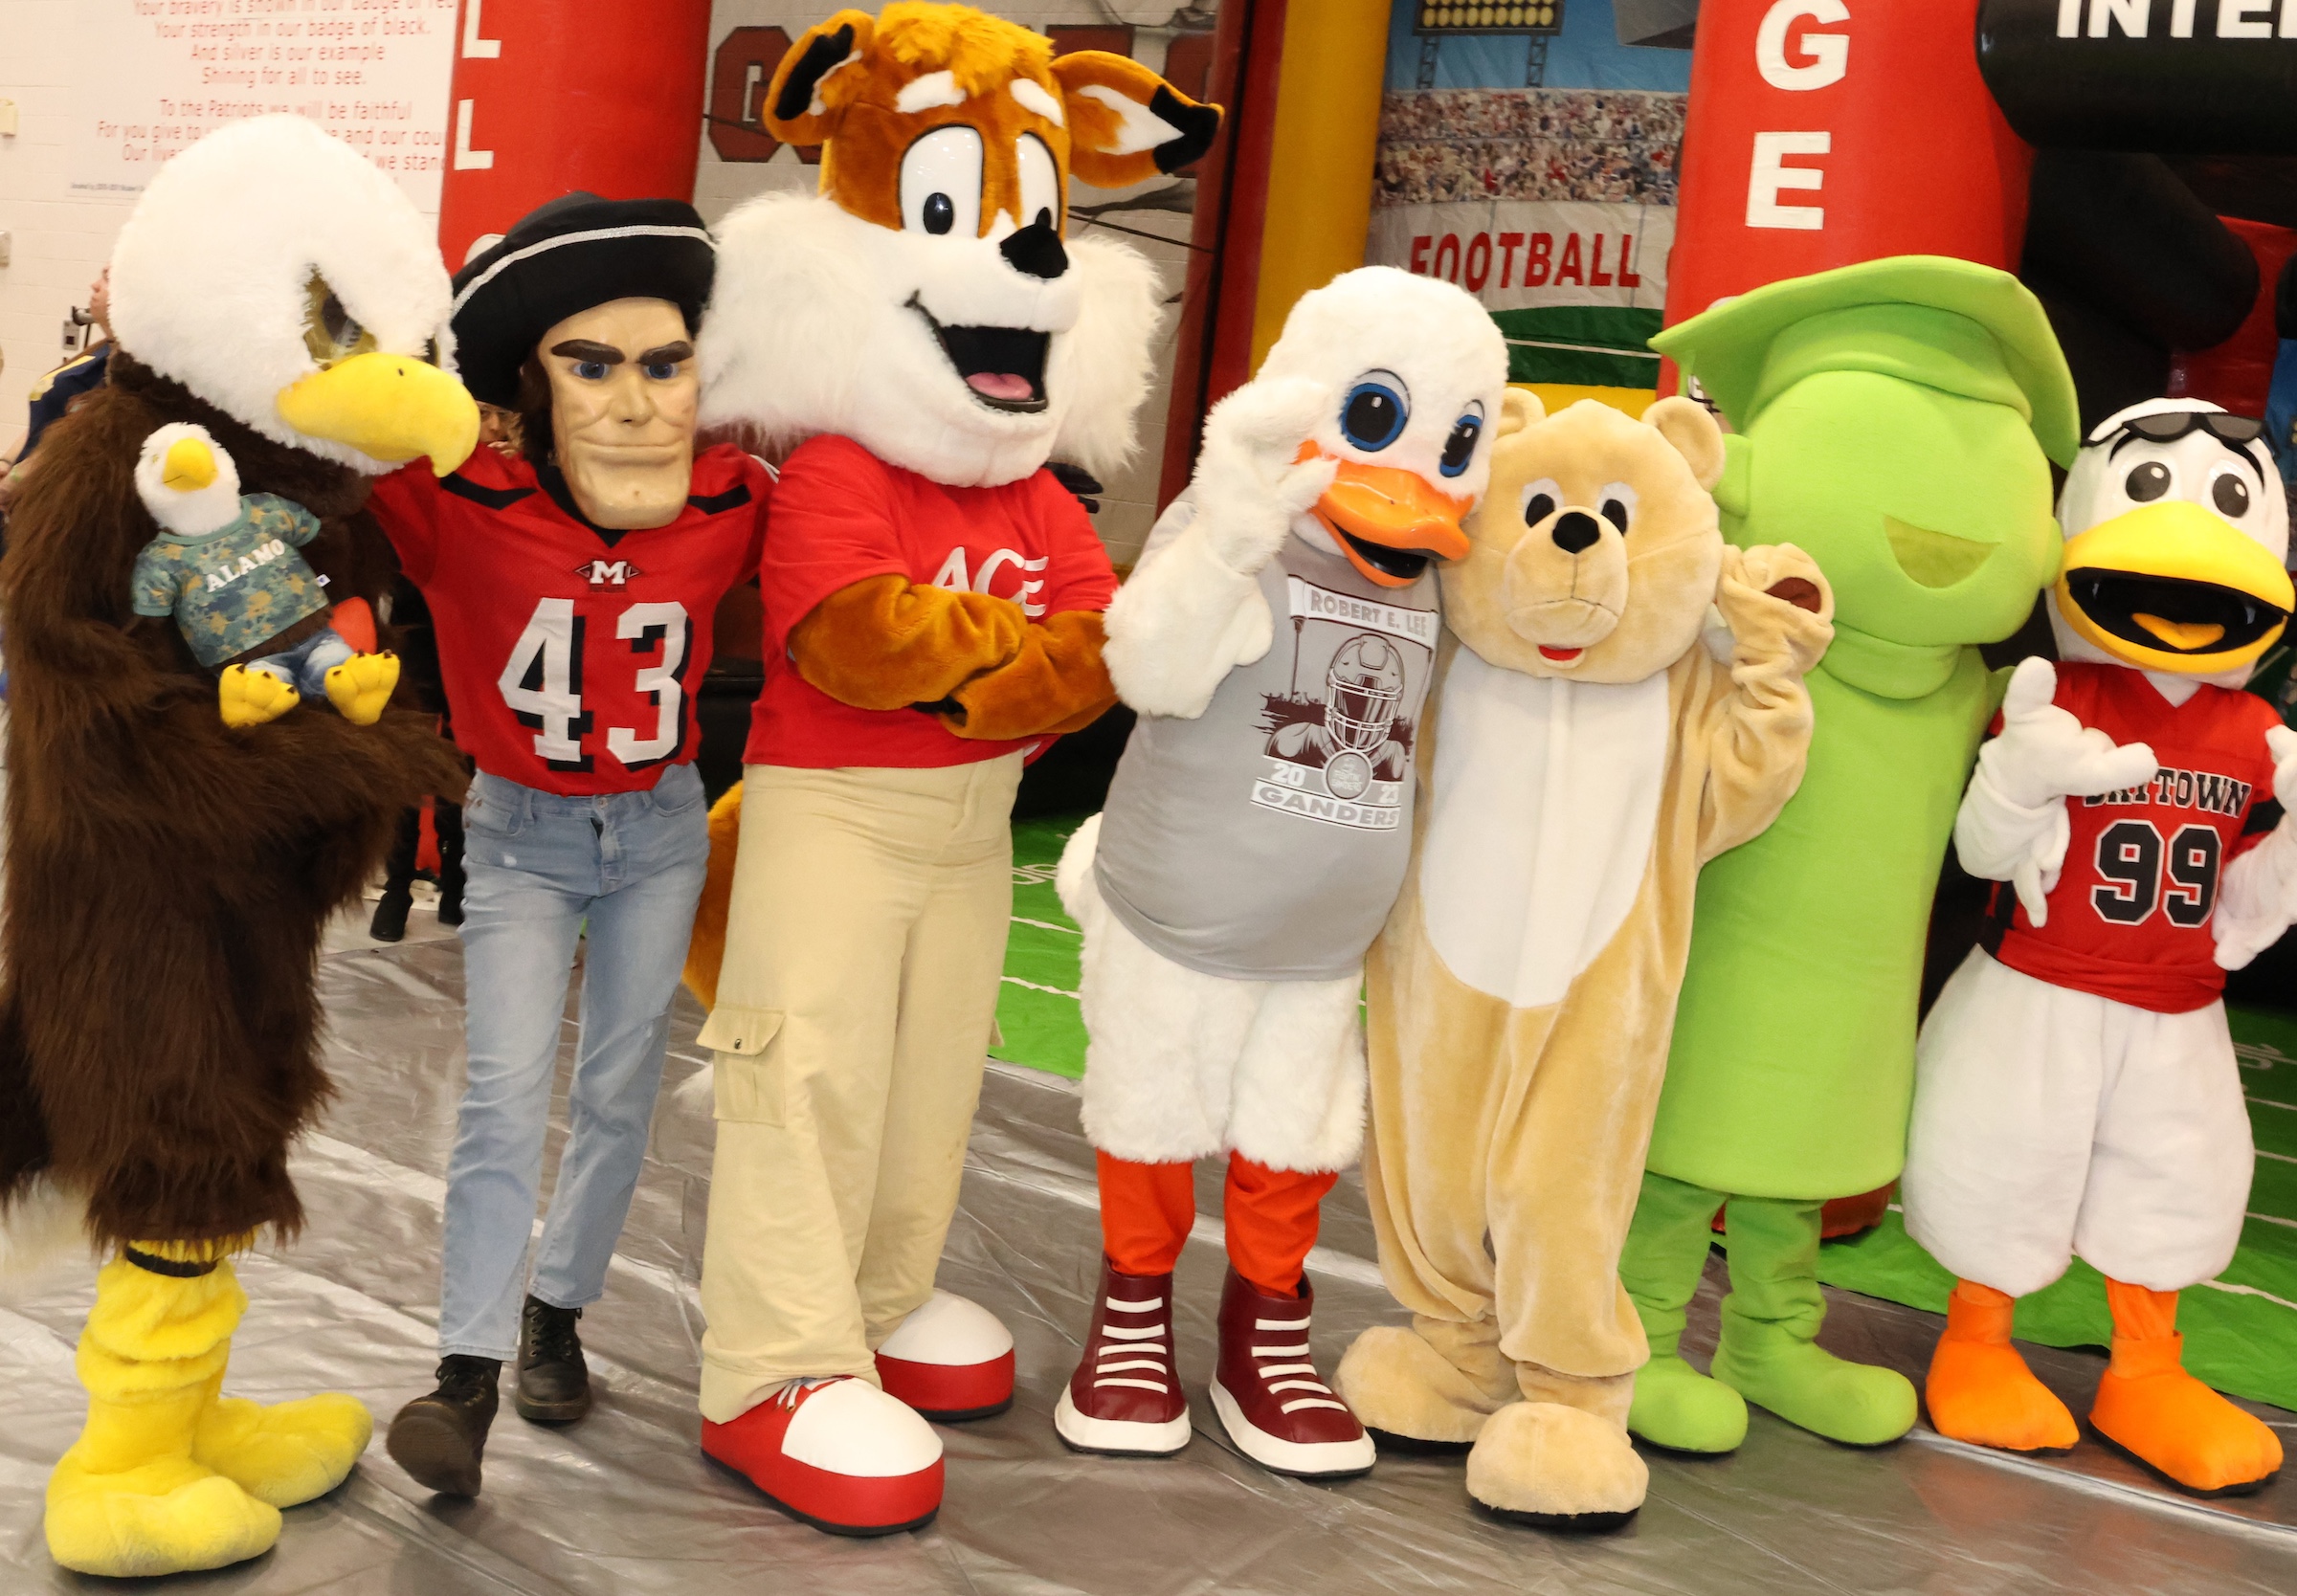 multiple campus mascots pose together with the district giant mascot